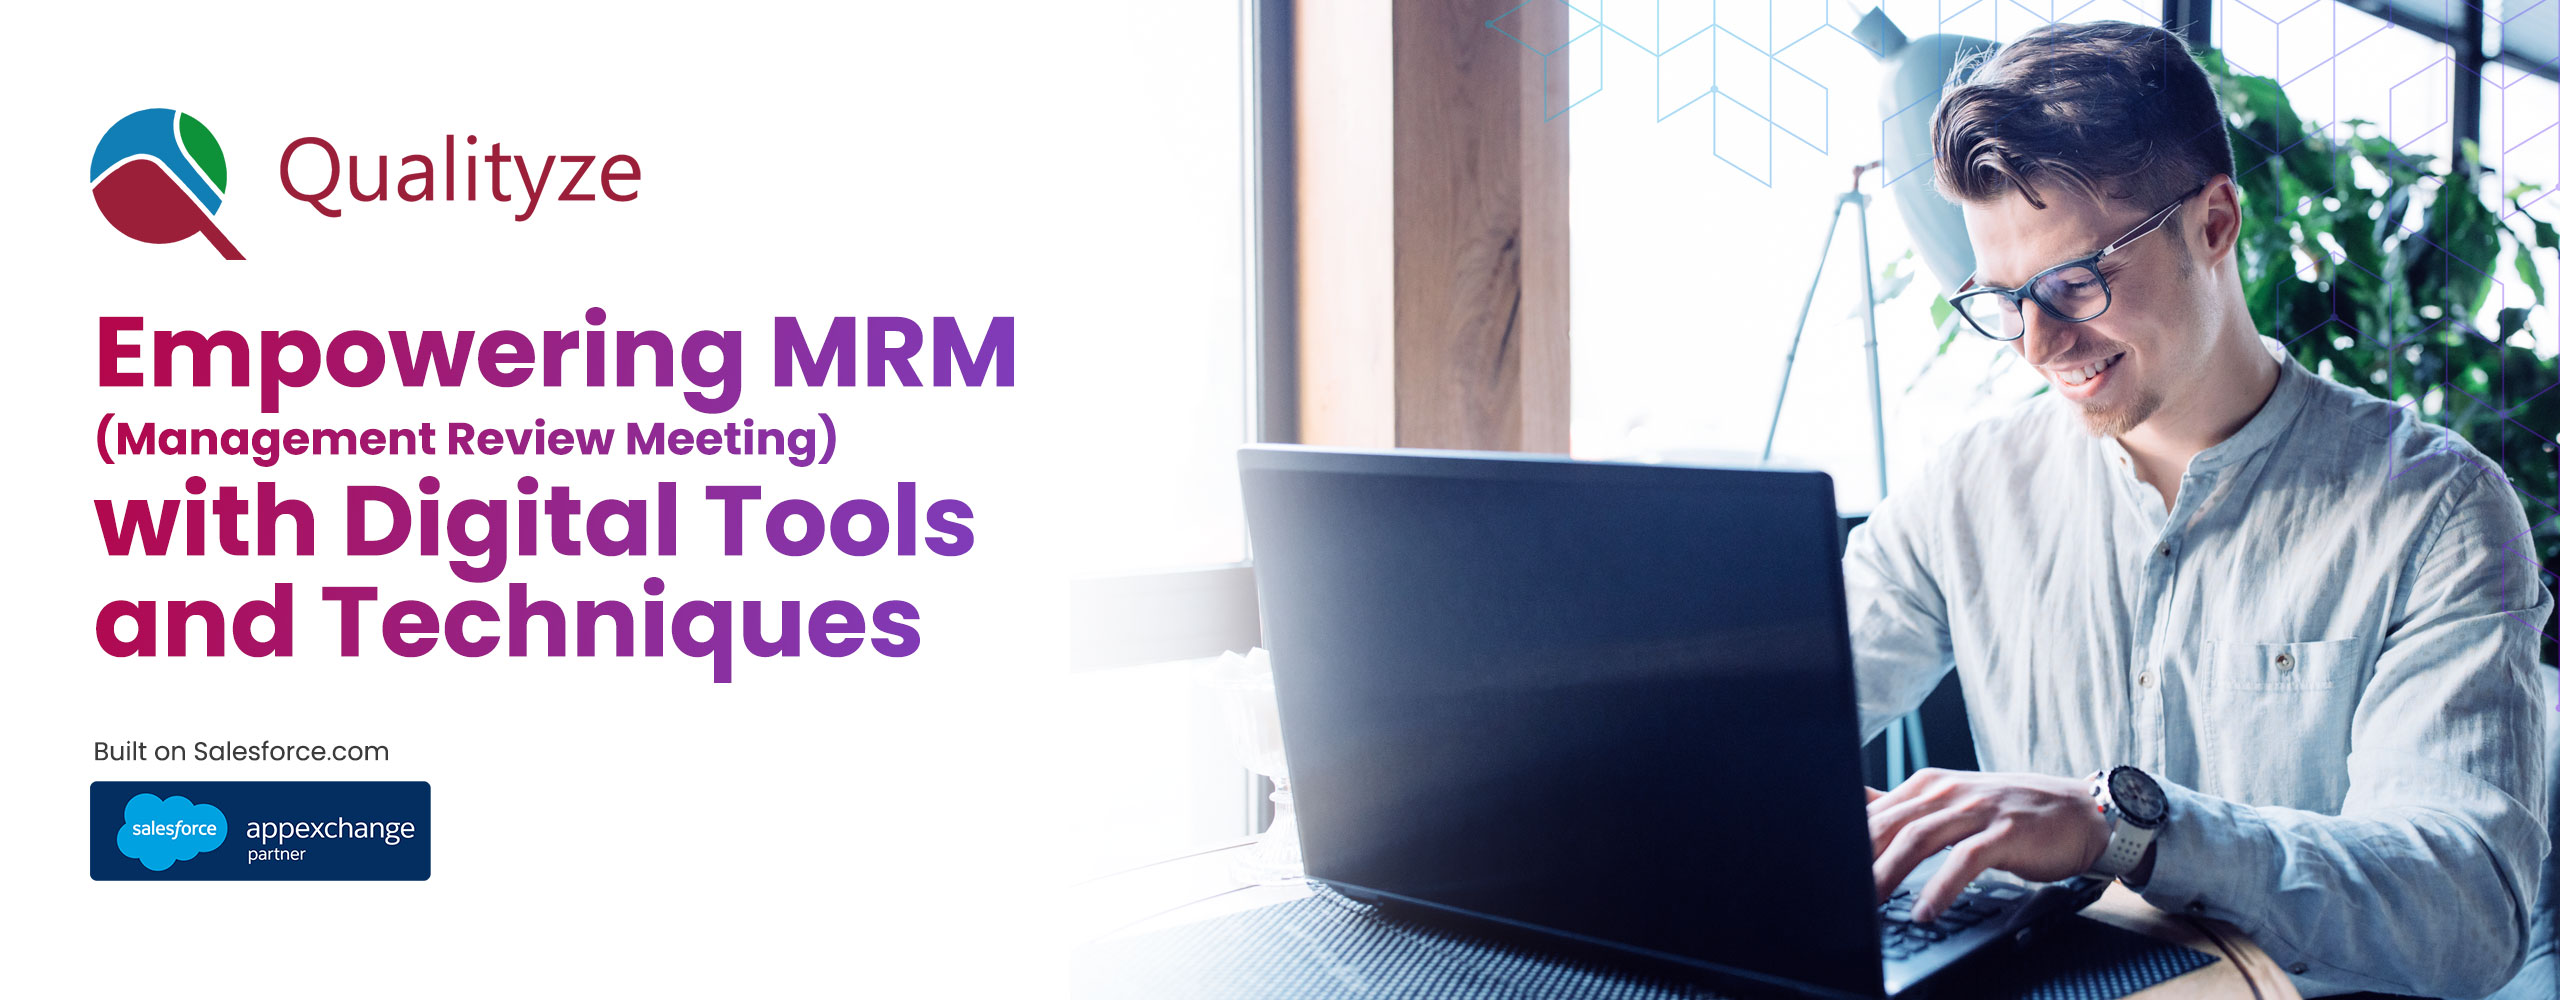 Empowering MRM (Management Review Meeting) with Digital Tools and Techniques